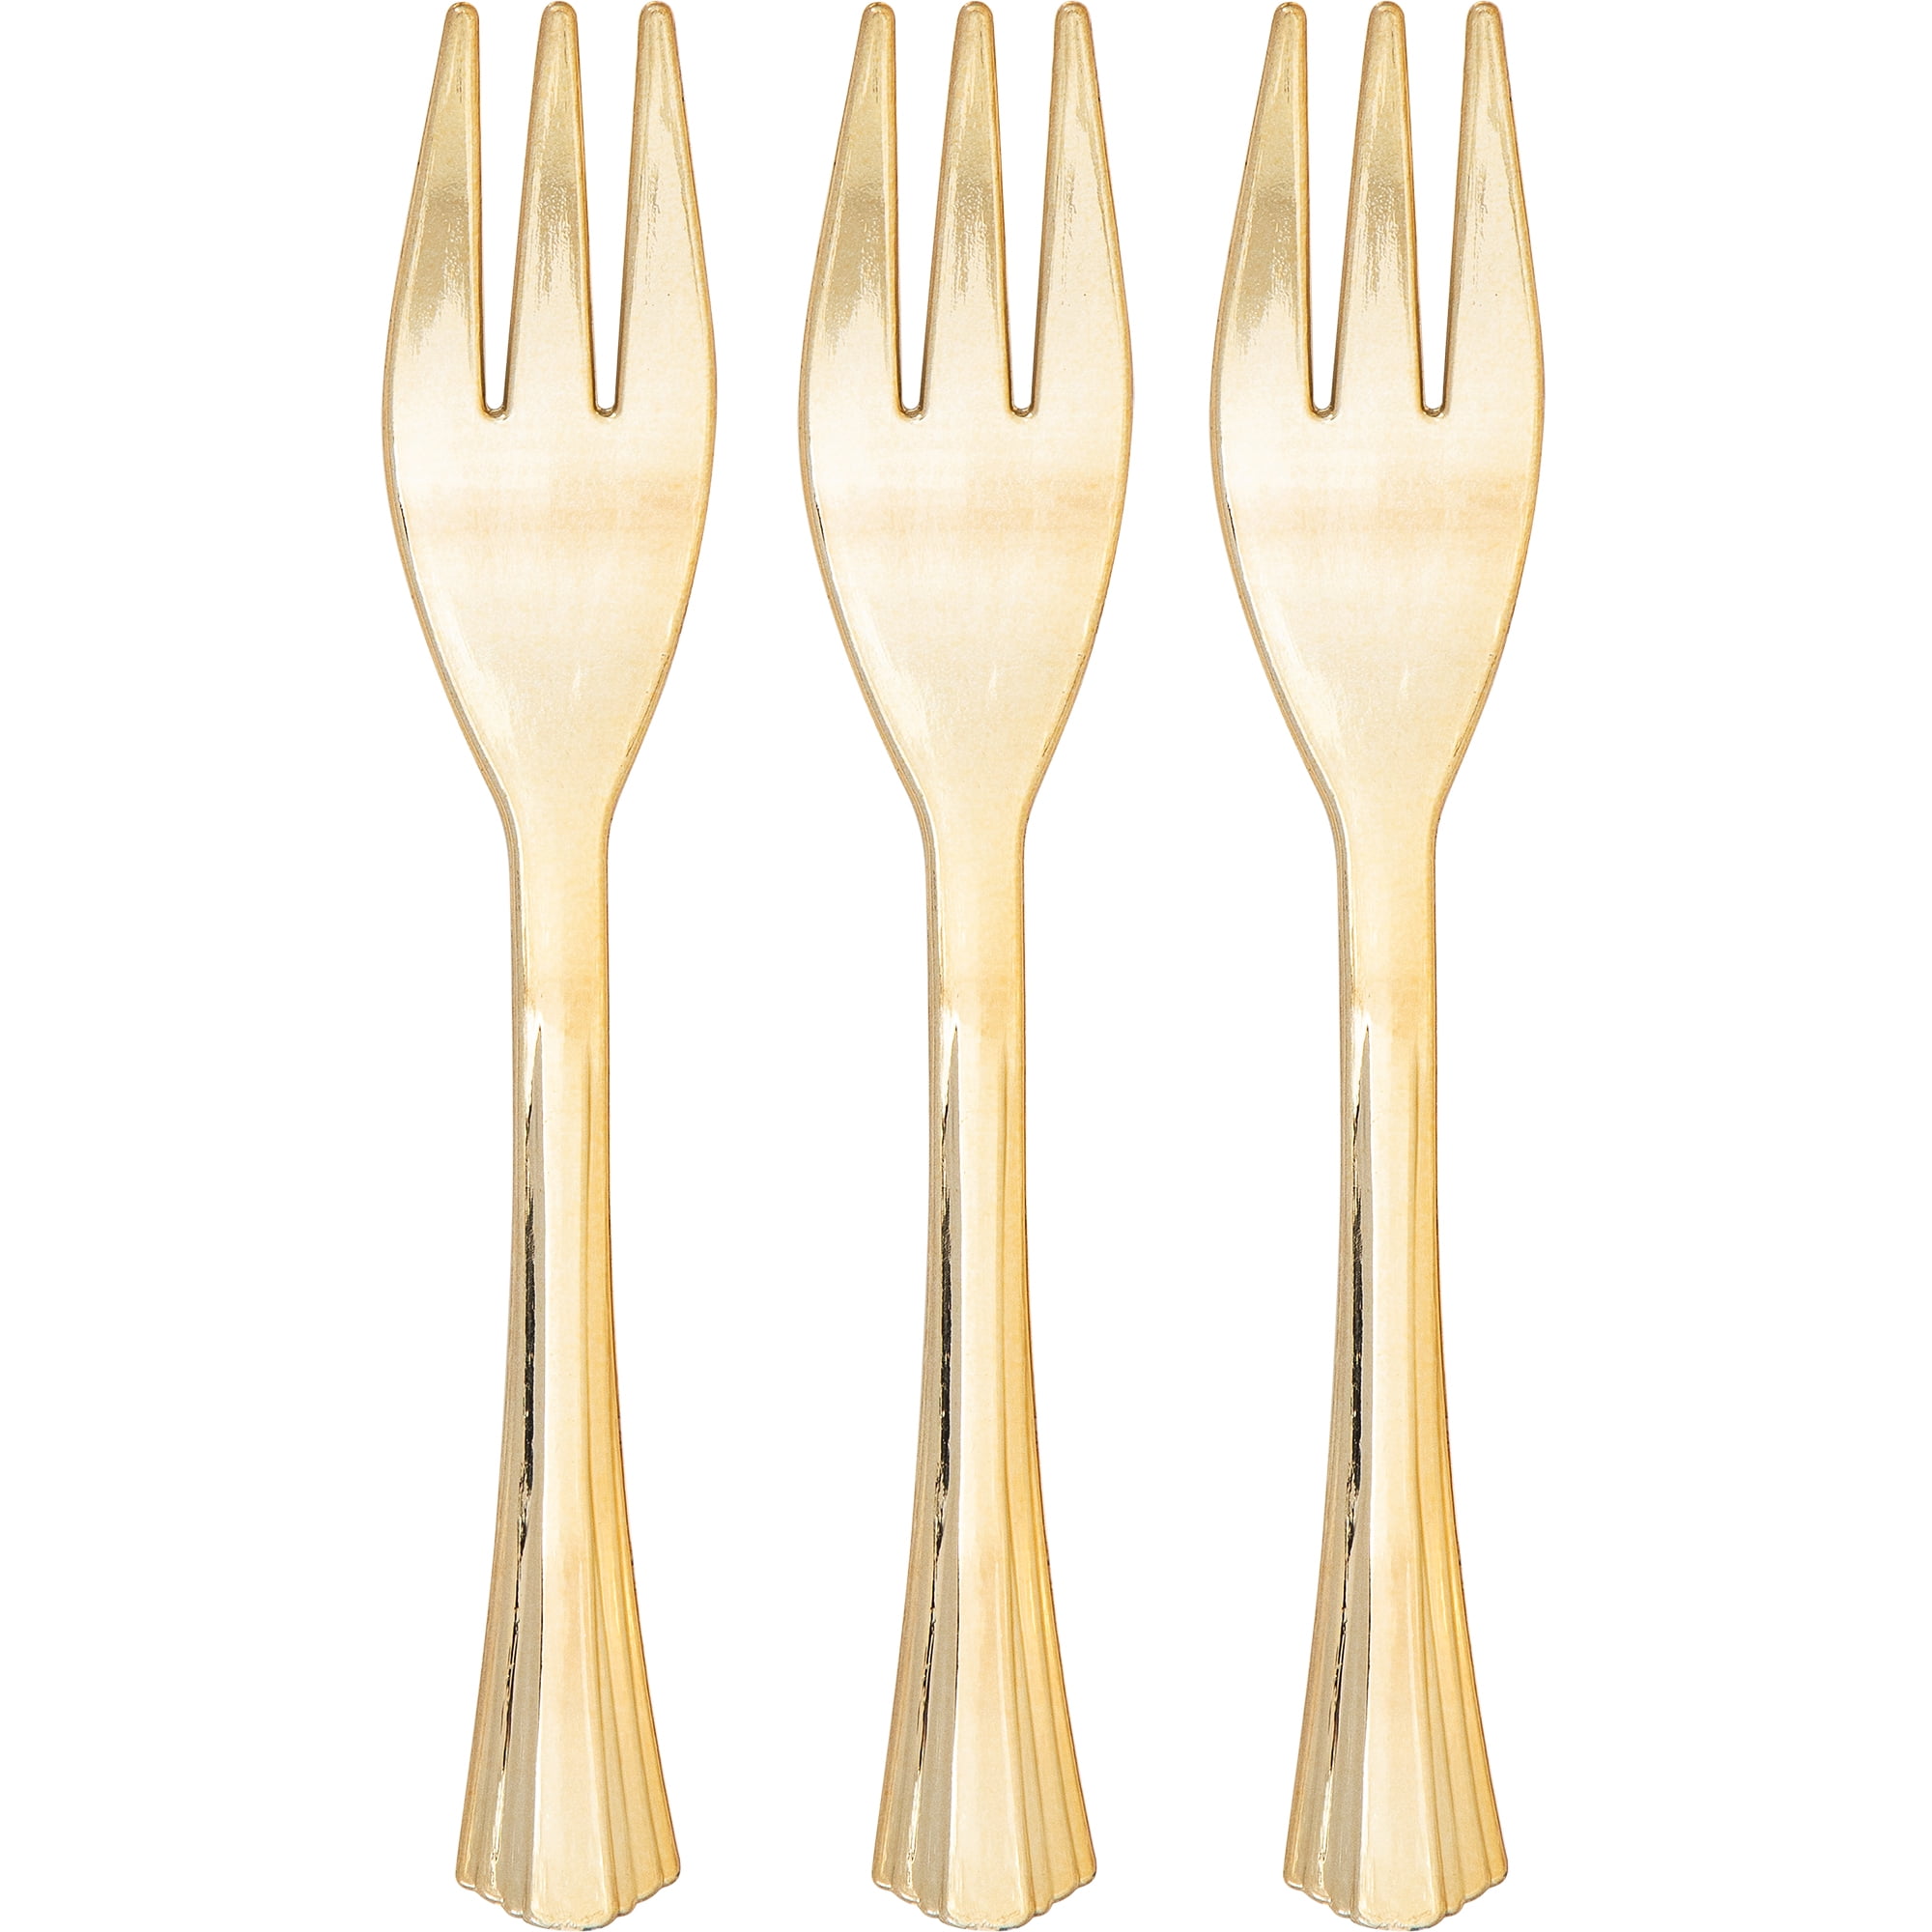 Way to Celebrate! Disposable Plastic Mini Forks, Party, Gold, 24 Ct.